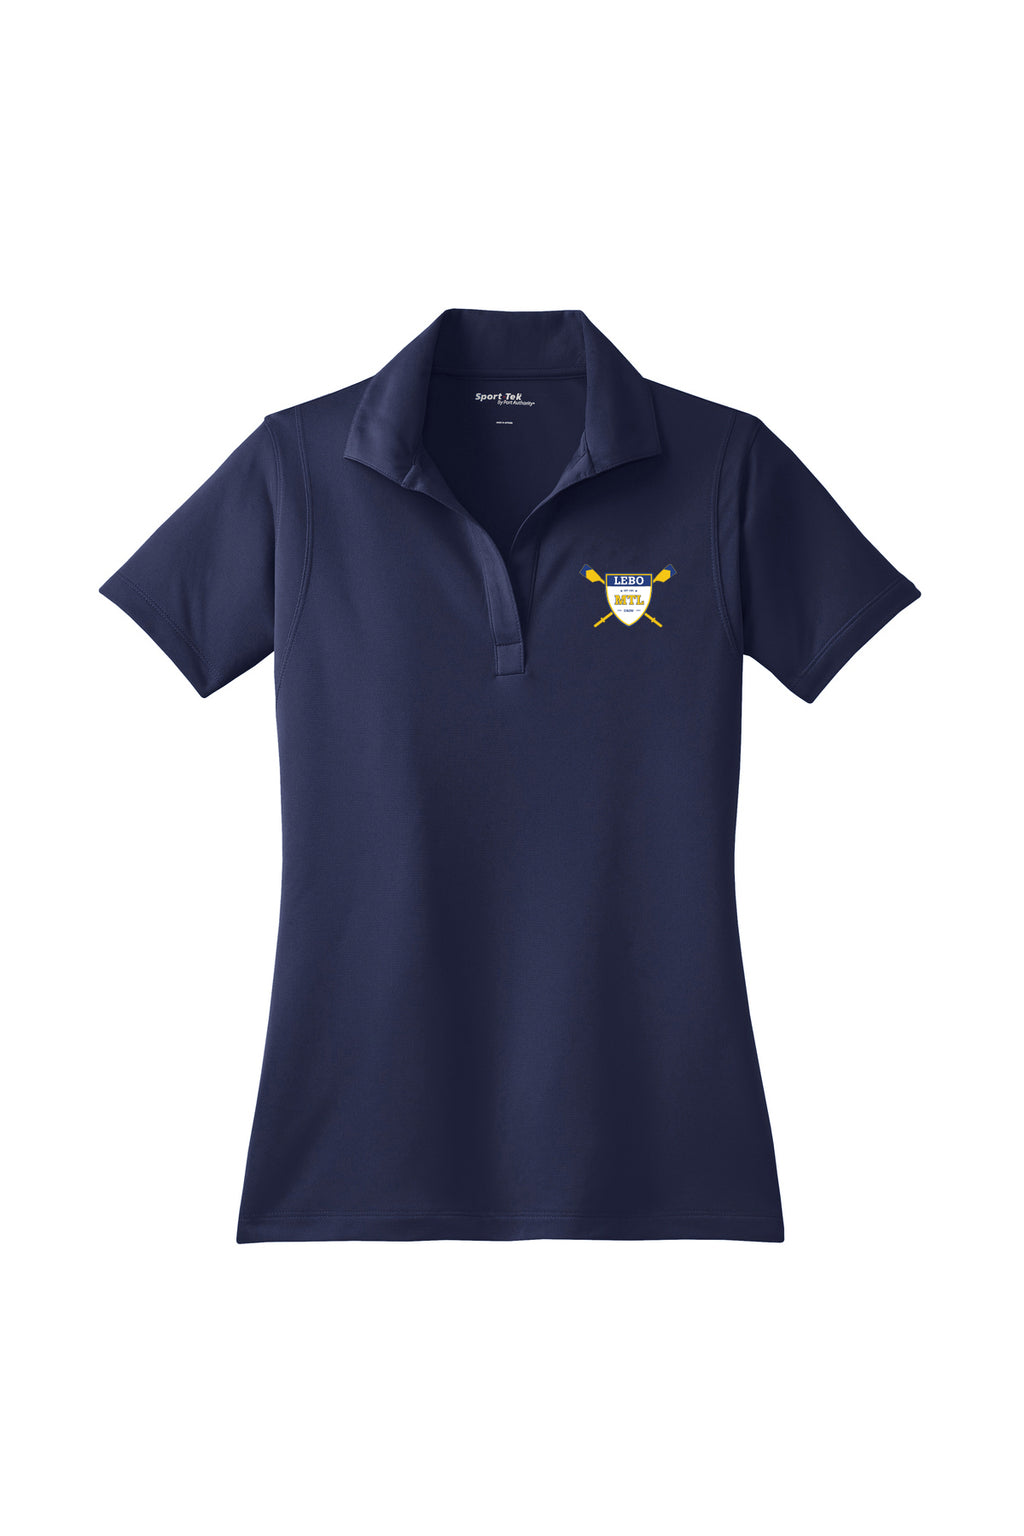 Mt. Lebanon Rowing Embroidered Performance Ladies Polo